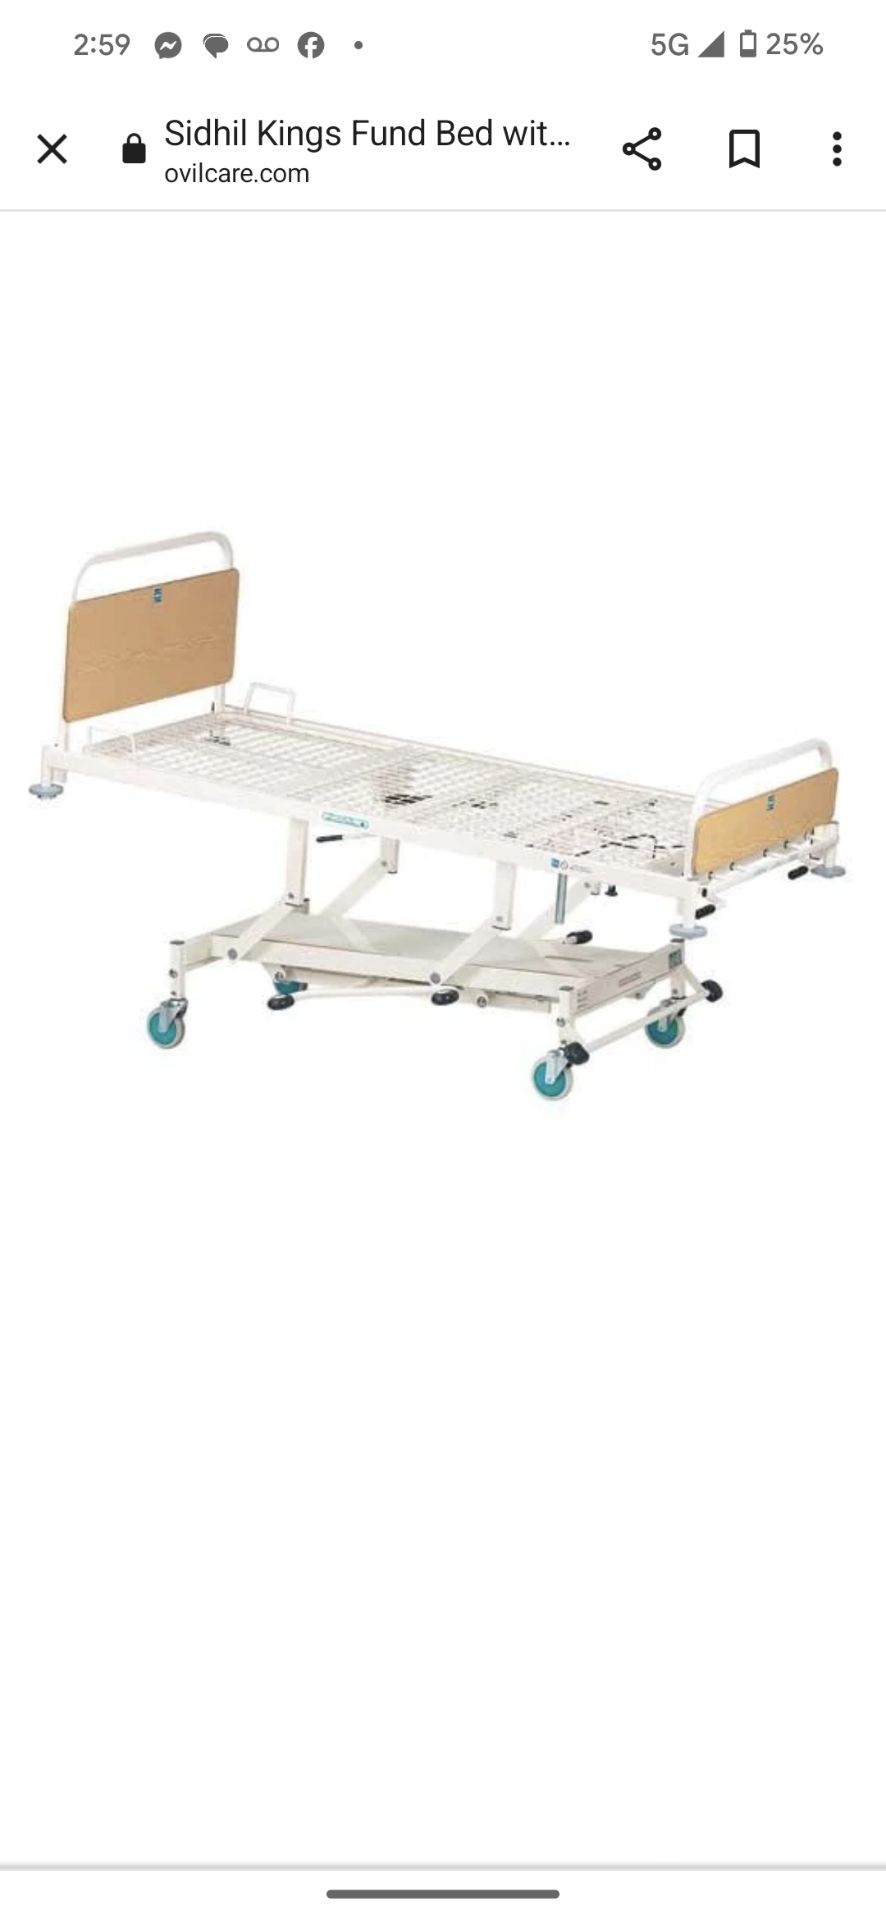 2x Sidhil Kings Fund Hydraulic Hospital Beds With Mattresses - Image 7 of 7